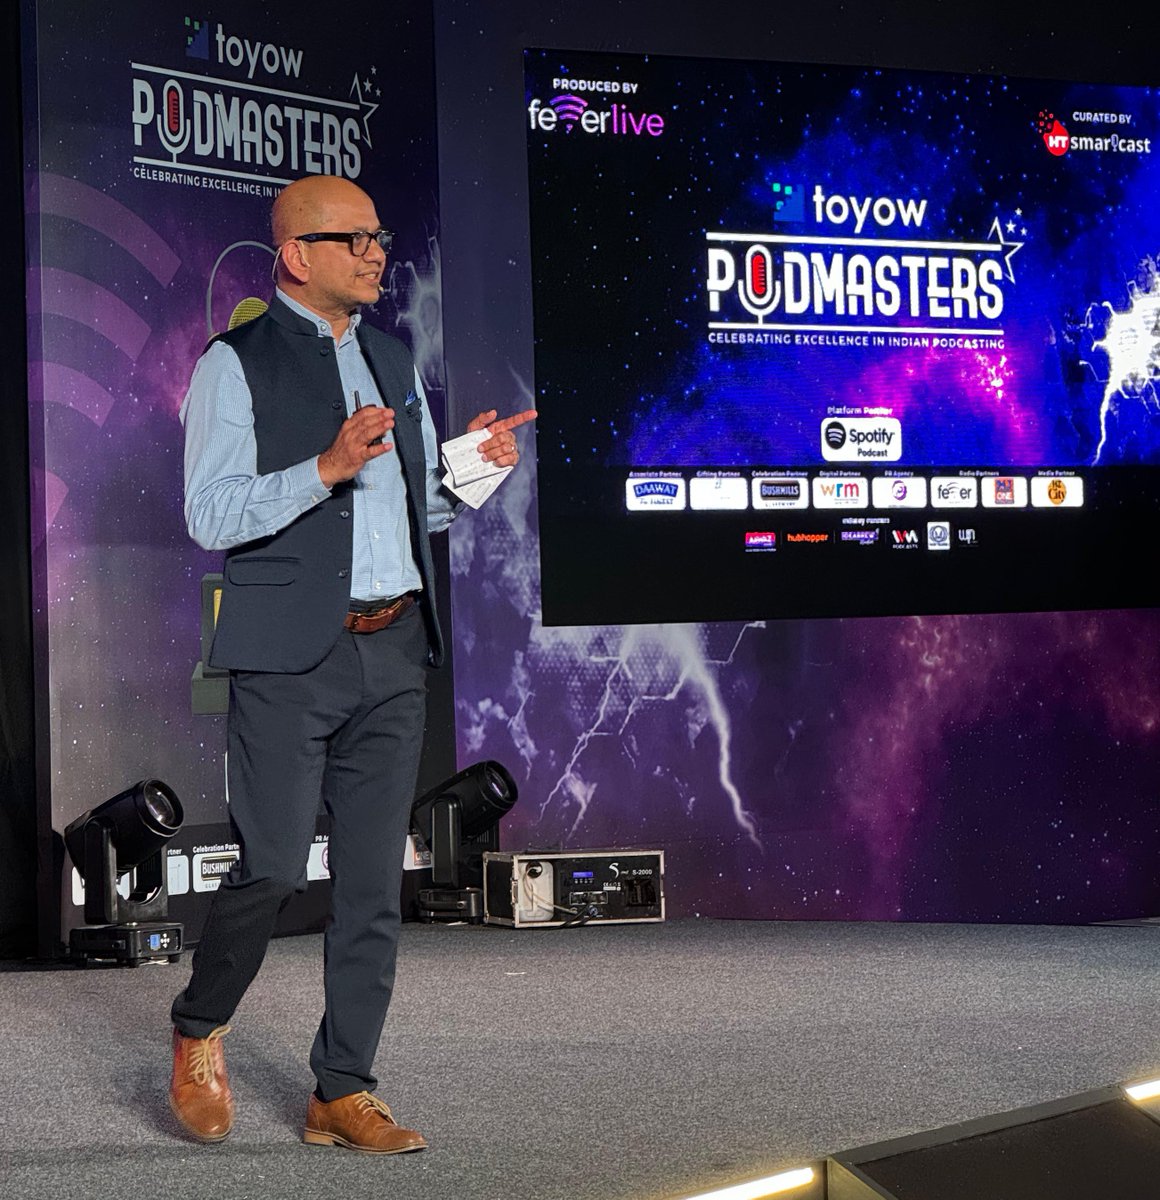 #Podmasters2024 | 'When we thought of #Podmasters, we were very clear. It has to be about 'You'. Podmasters is a program of podcasters, for podcasters, by podcasters,' says Yatin Naik, Business Head, Digital Audio, Fever FM Network

@HTSmartcast